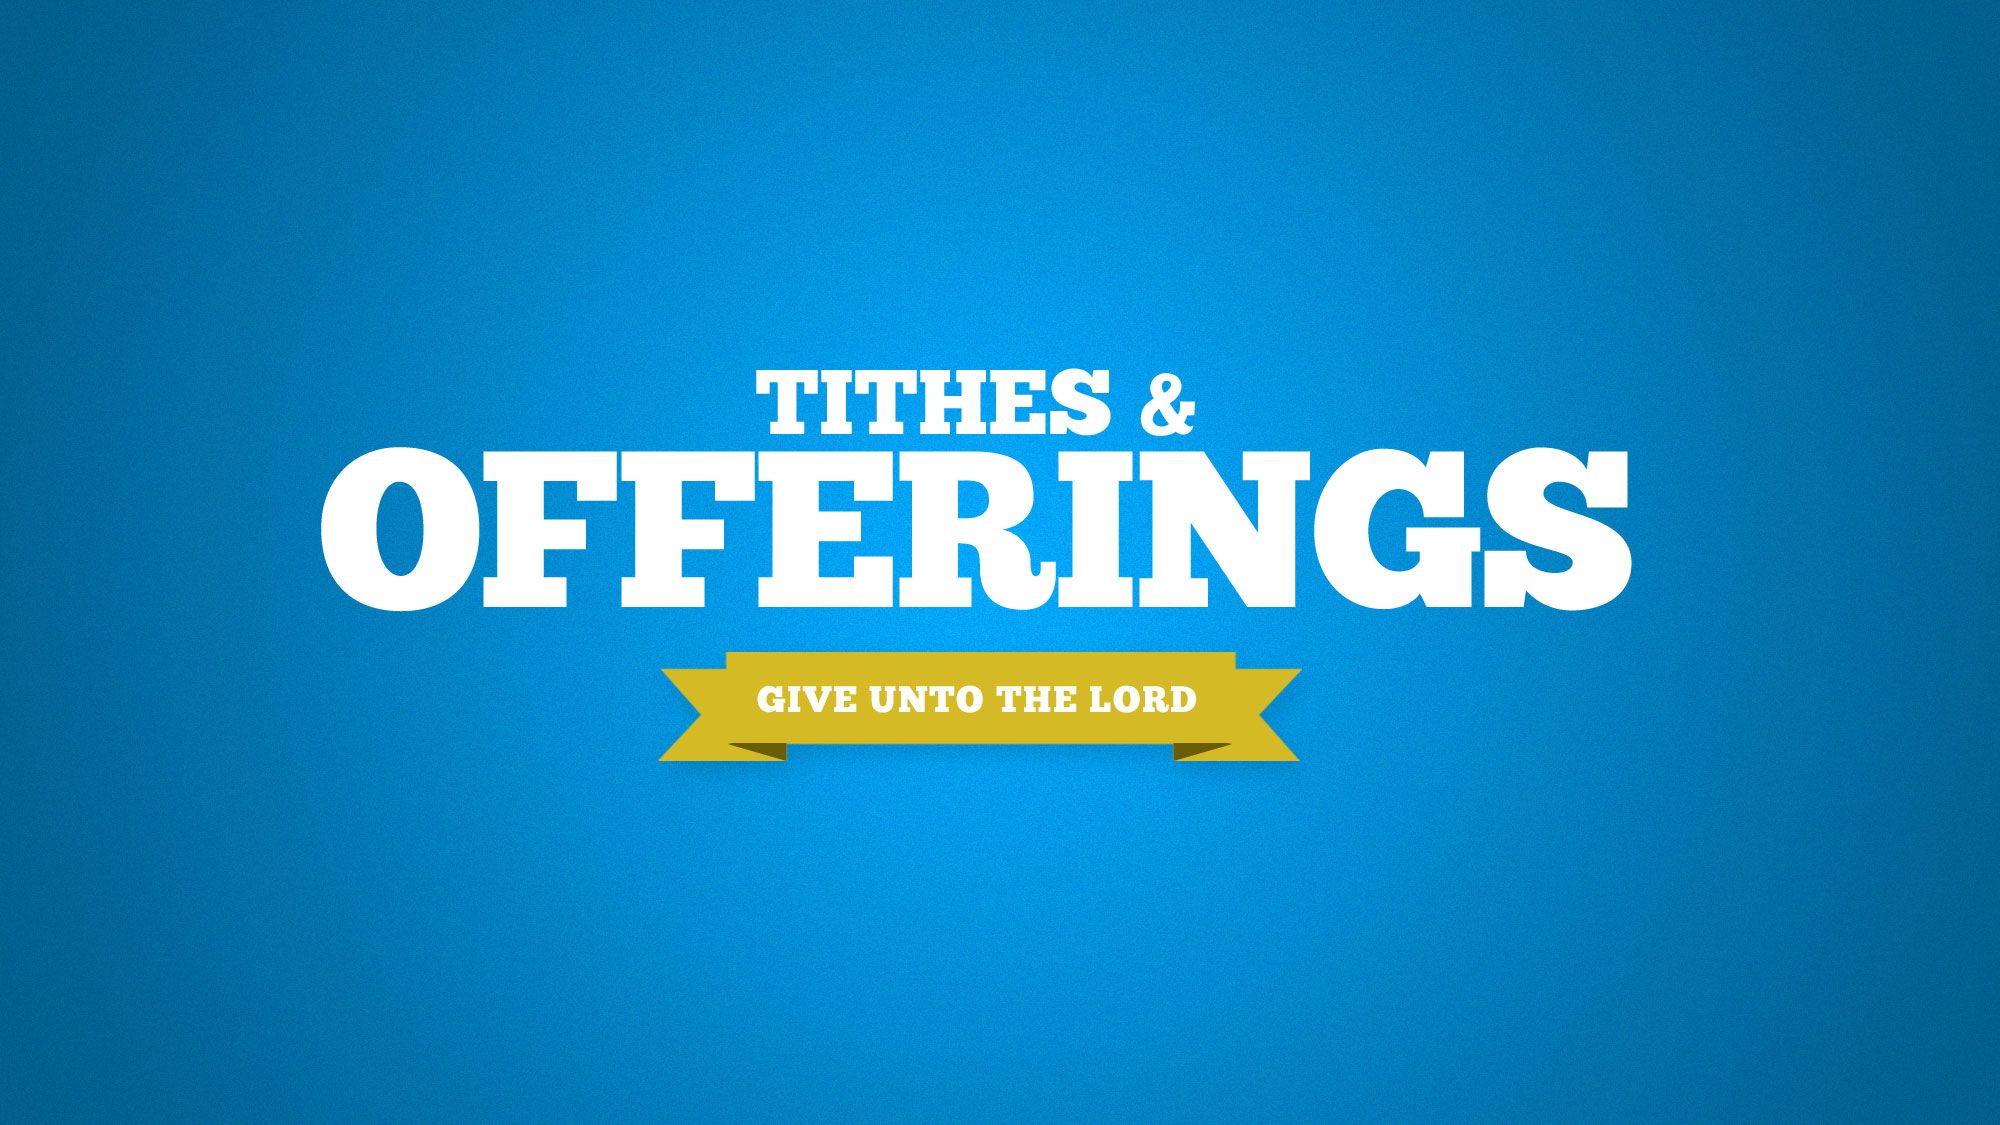 Tithes and Offerings. Tithing, Bible, Our father in heaven